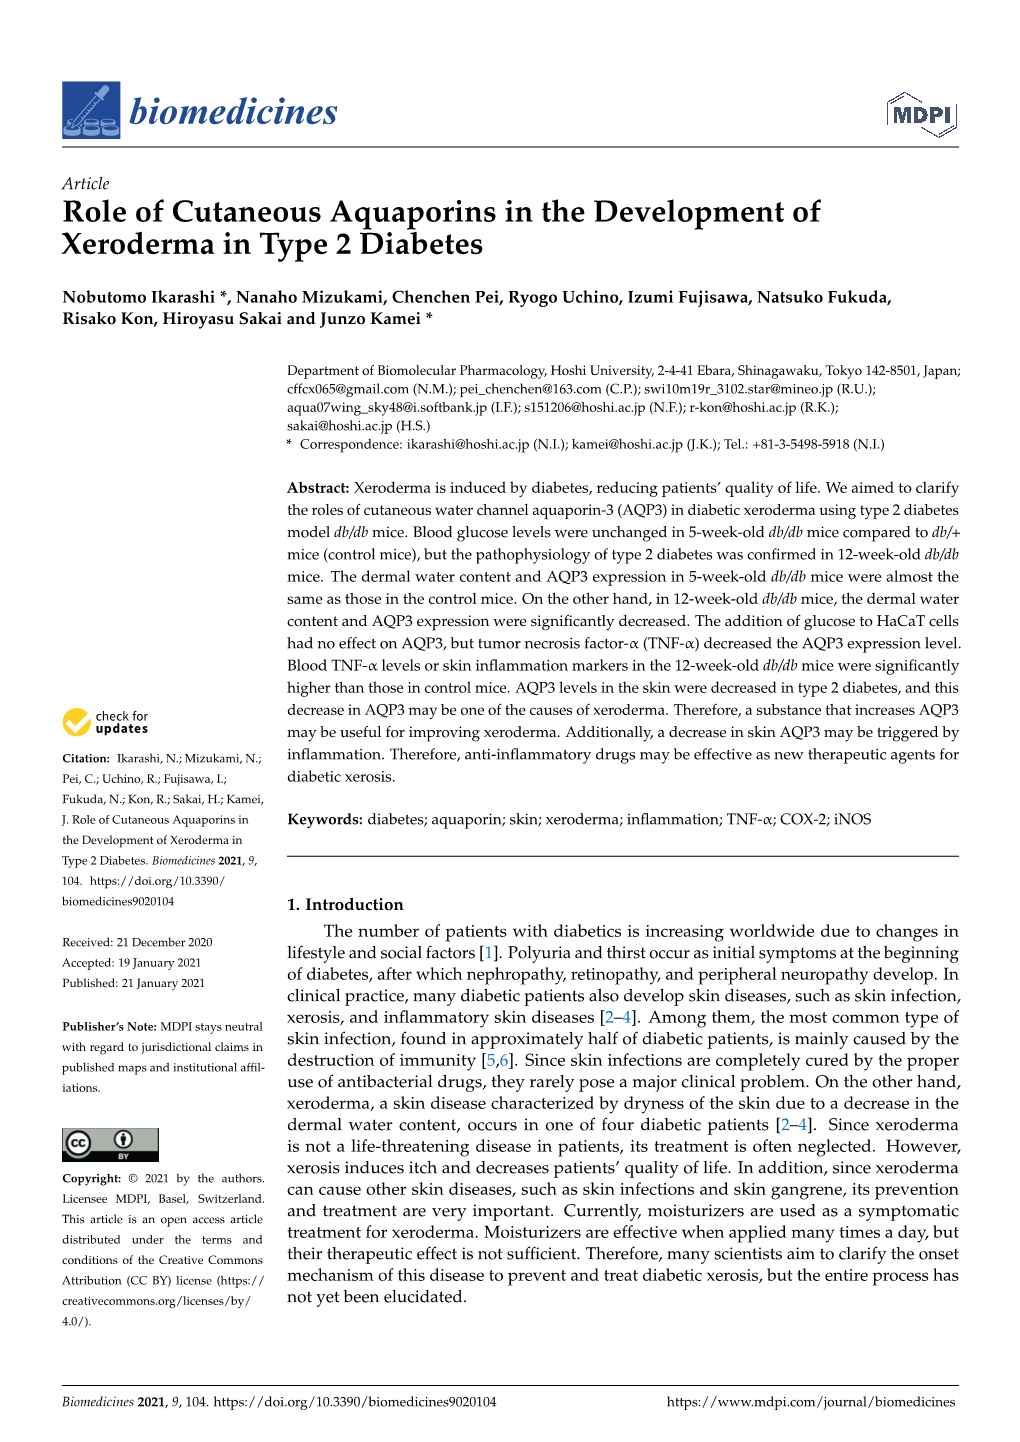 Role of Cutaneous Aquaporins in the Development of Xeroderma in Type 2 Diabetes